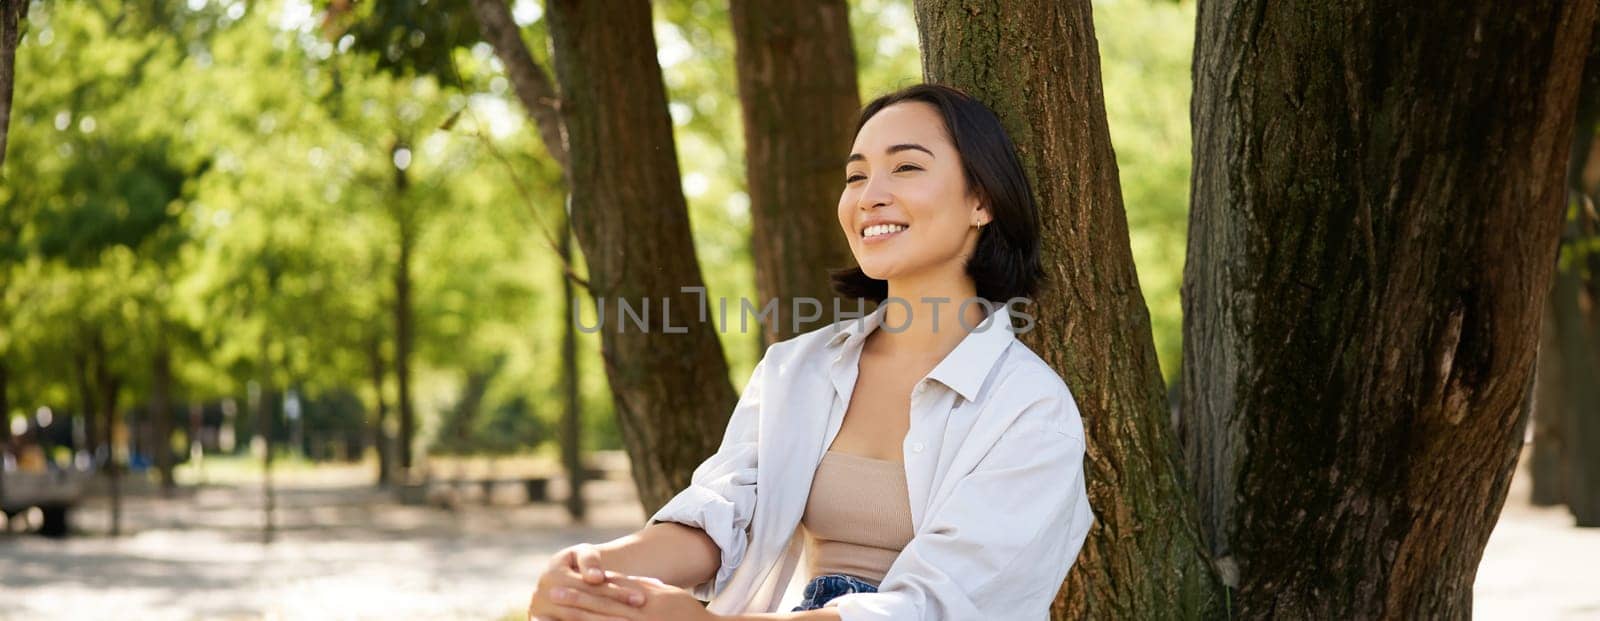 Portrait of asian girl relaxing, leaning on tree and resting in park under shade, smiling and enjoying the walk outdoors by Benzoix